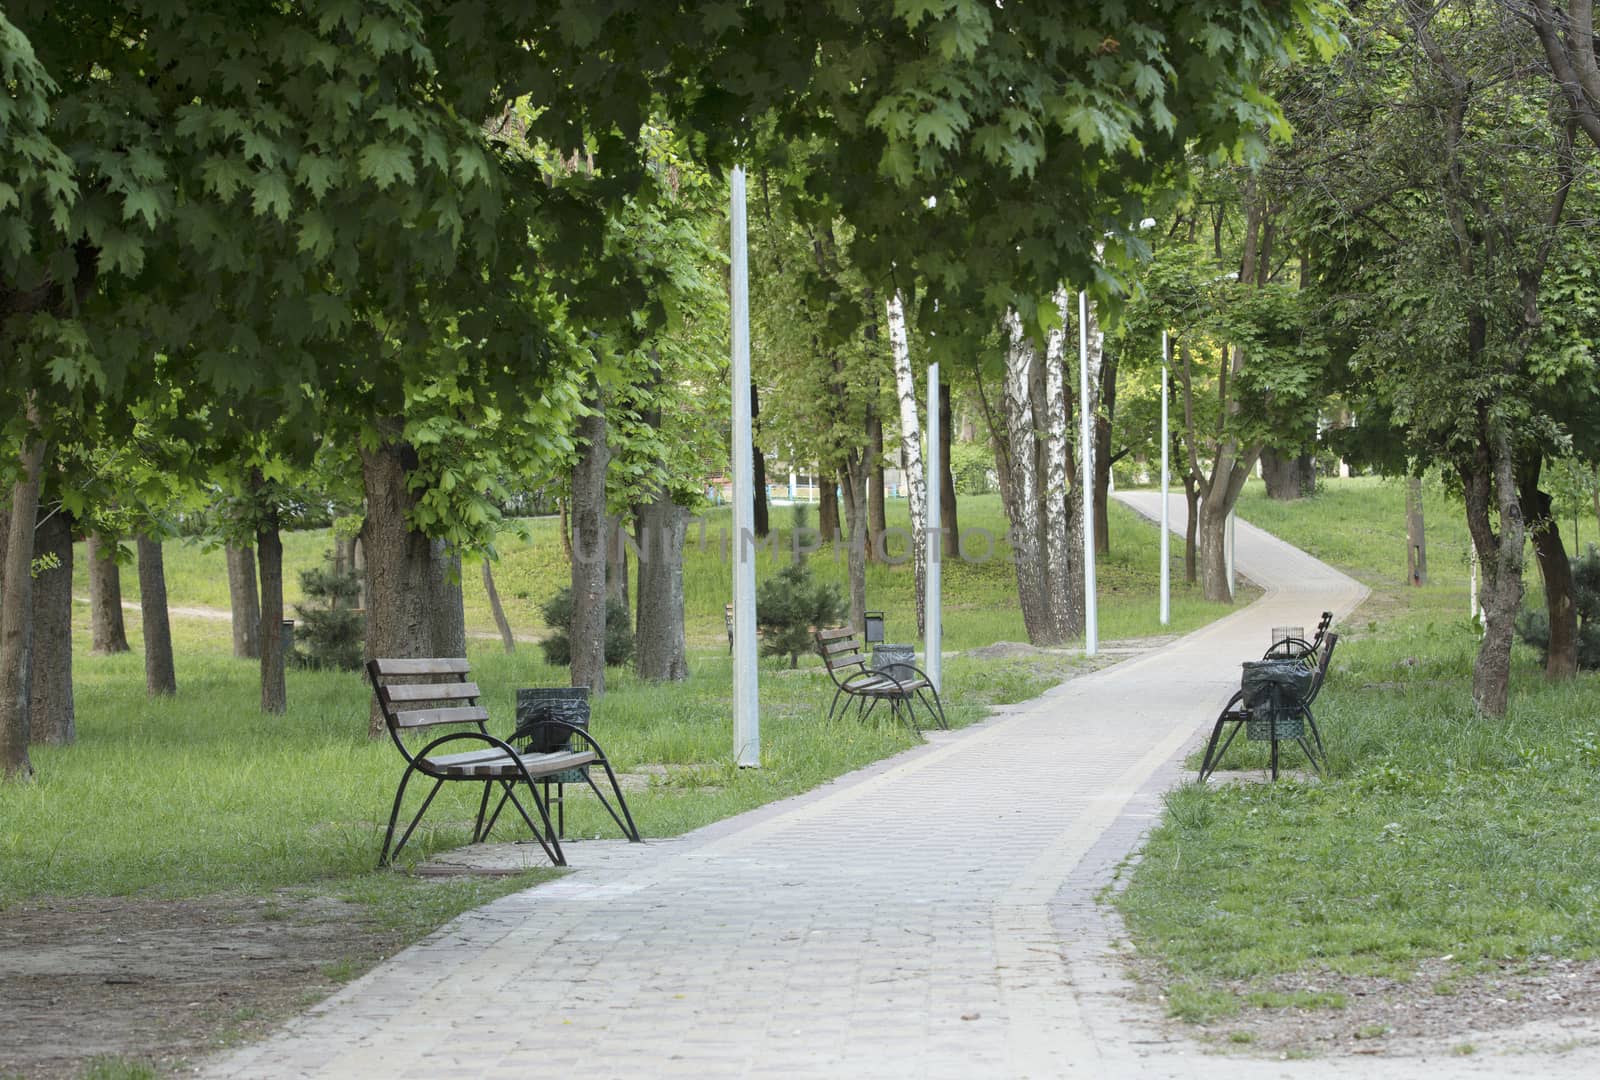 The laid road with wooden benches leaves into the distance in the city summer park by Sergii